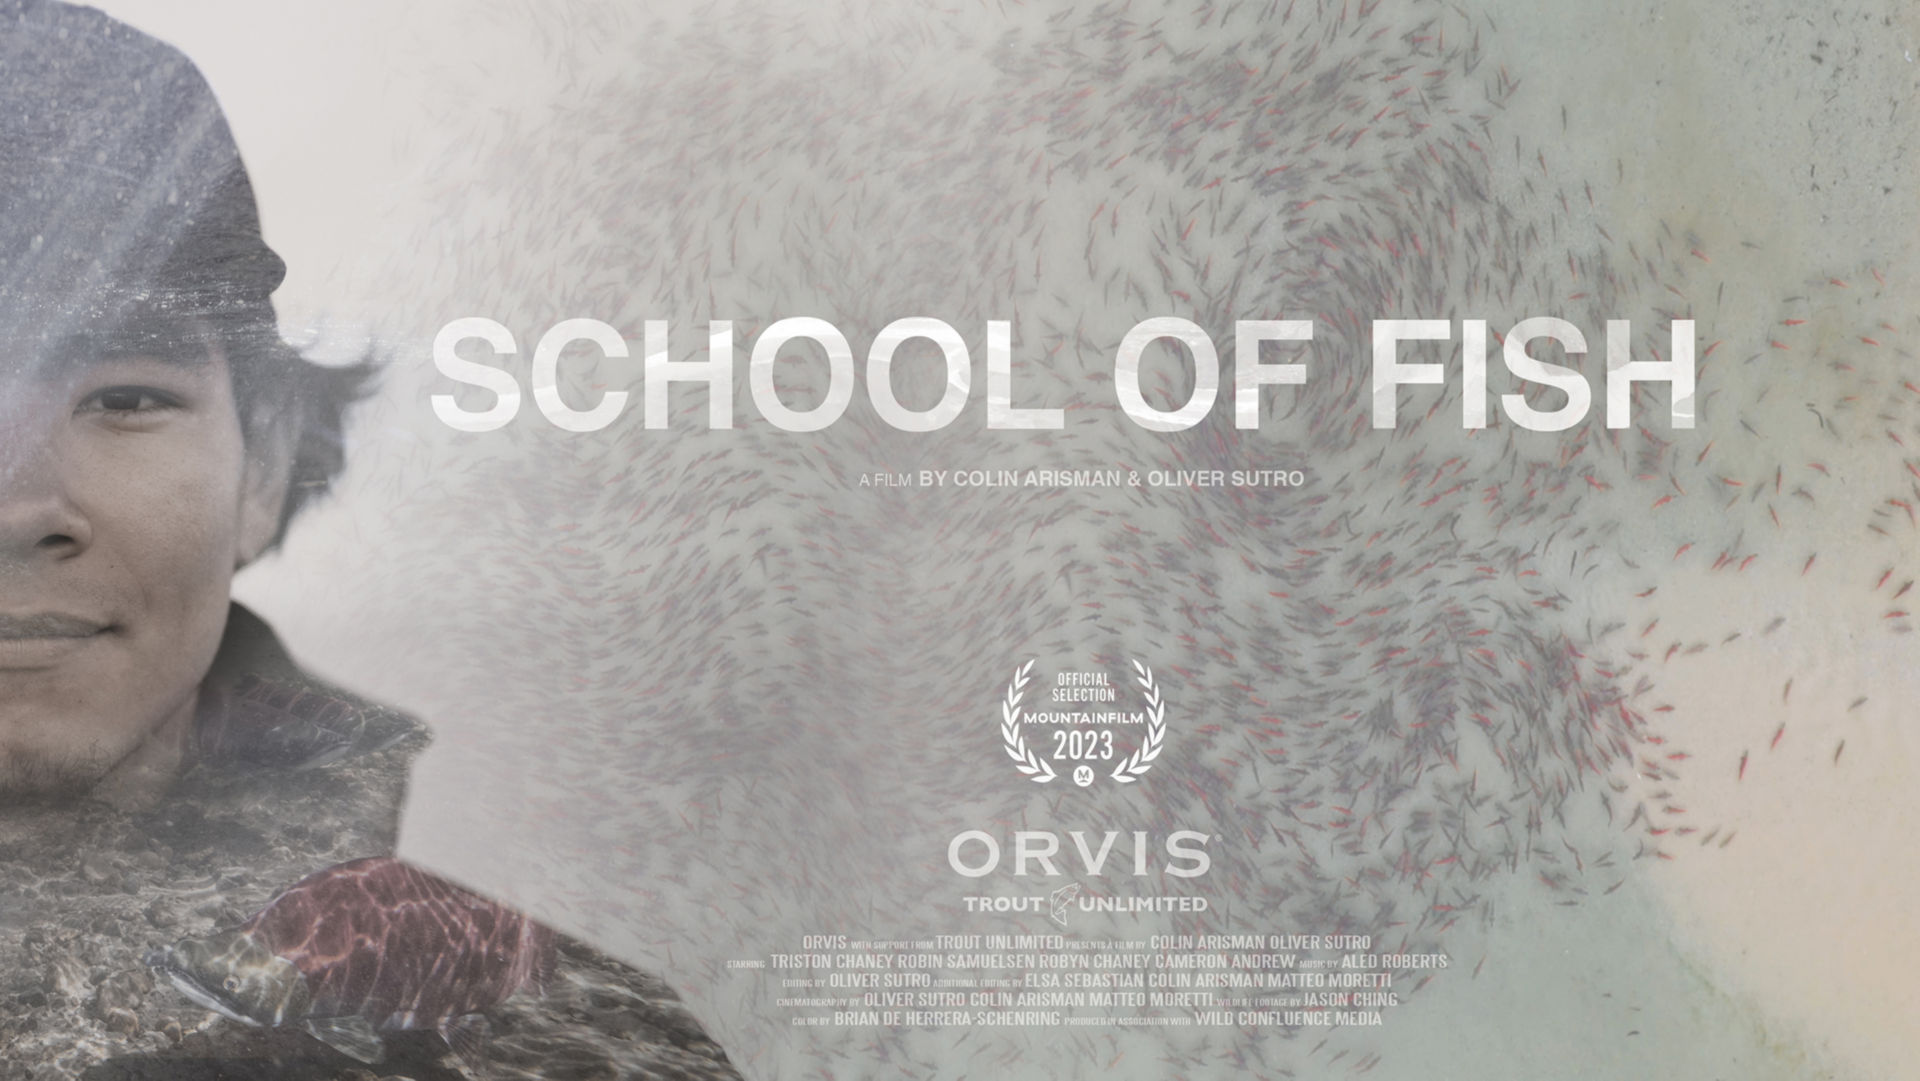 A collage of images of face looking at the camera superimposed on a school of salmon shot from above the water with the words "School of Fish: a Film by Colin Arisman & Oliver Sutro" as well as a MountainFilm Award for 2023.